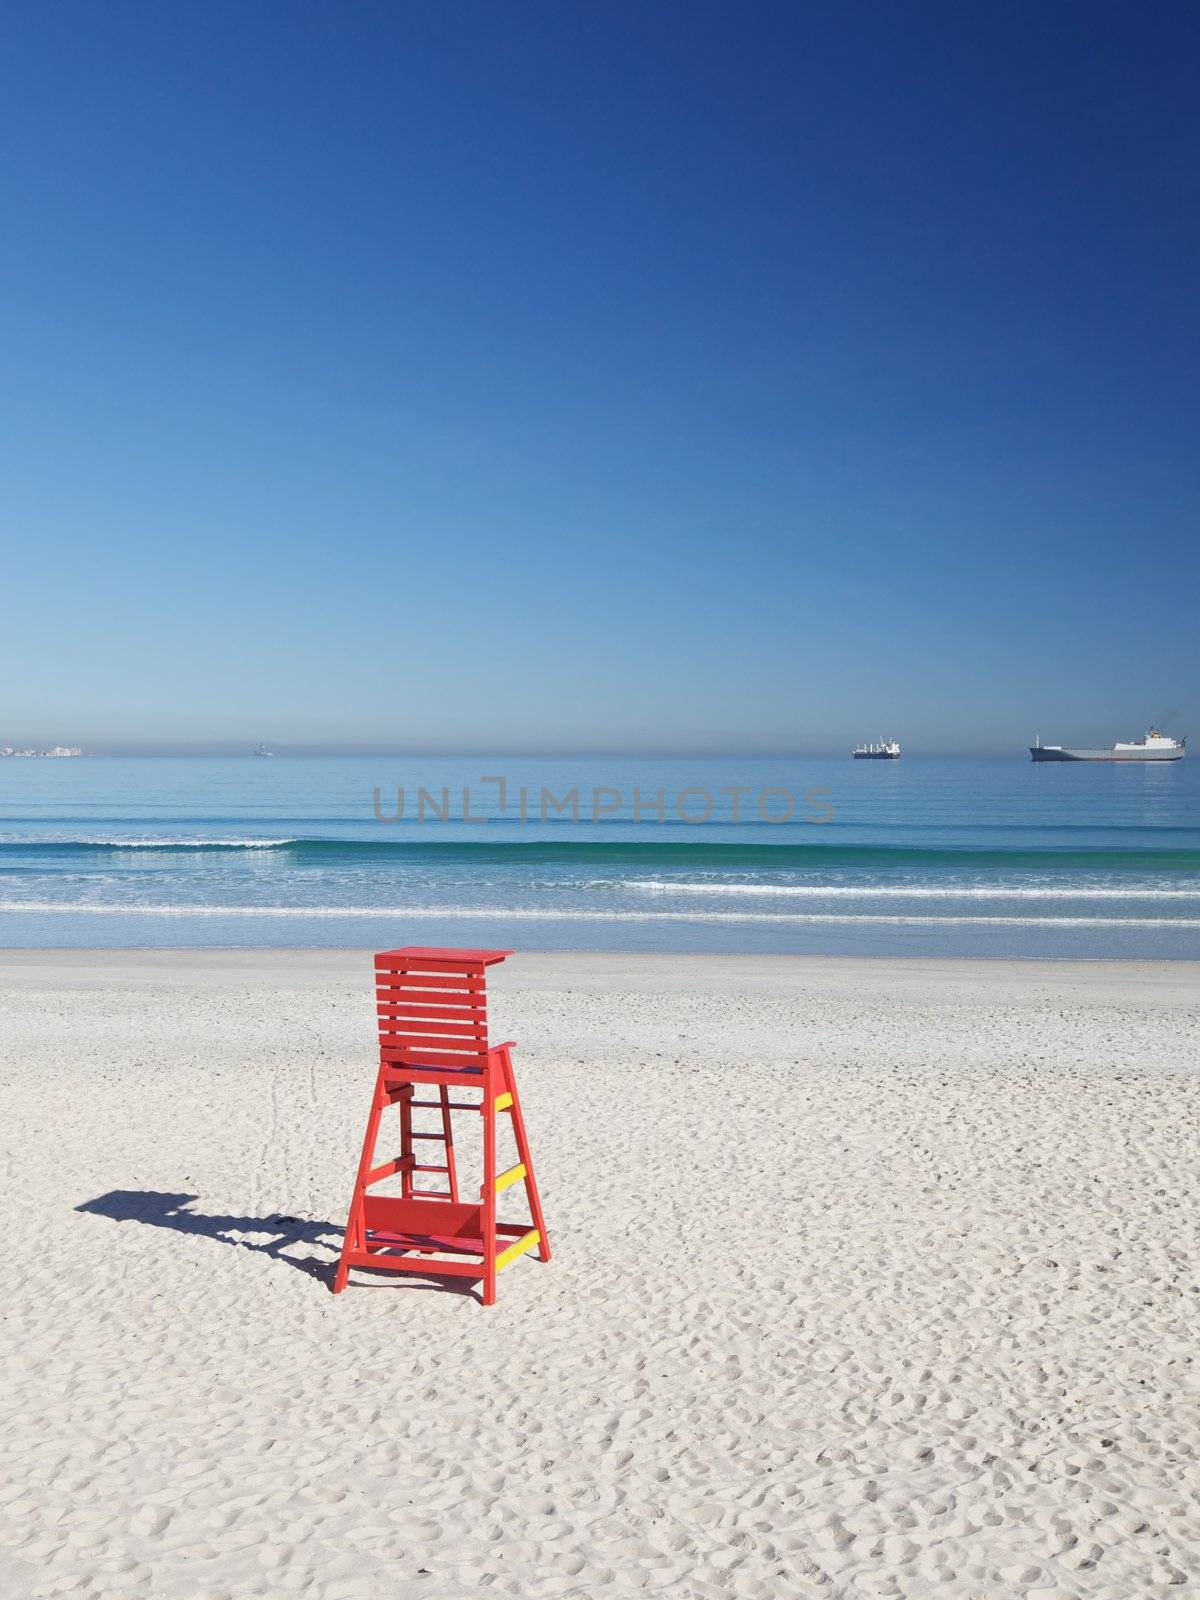 Life Saving Chair and Ships With Cargo on a Beach in Cape Town